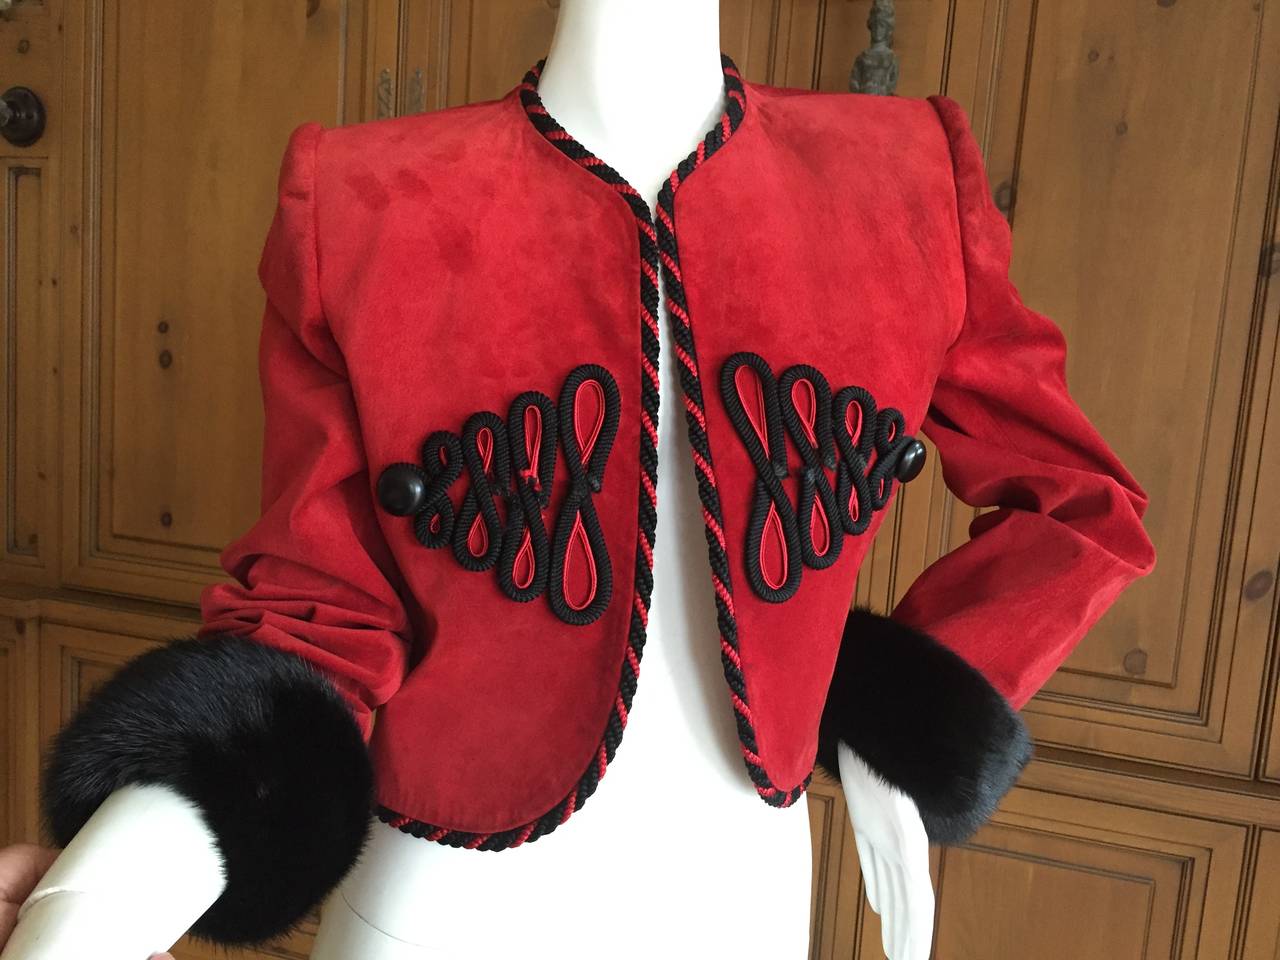 Givenchy Couture Red Suede Mink Trim Crop Jacket
Beautiful details include decorative rope cording and mink cuffs
Sz L
Bust 39